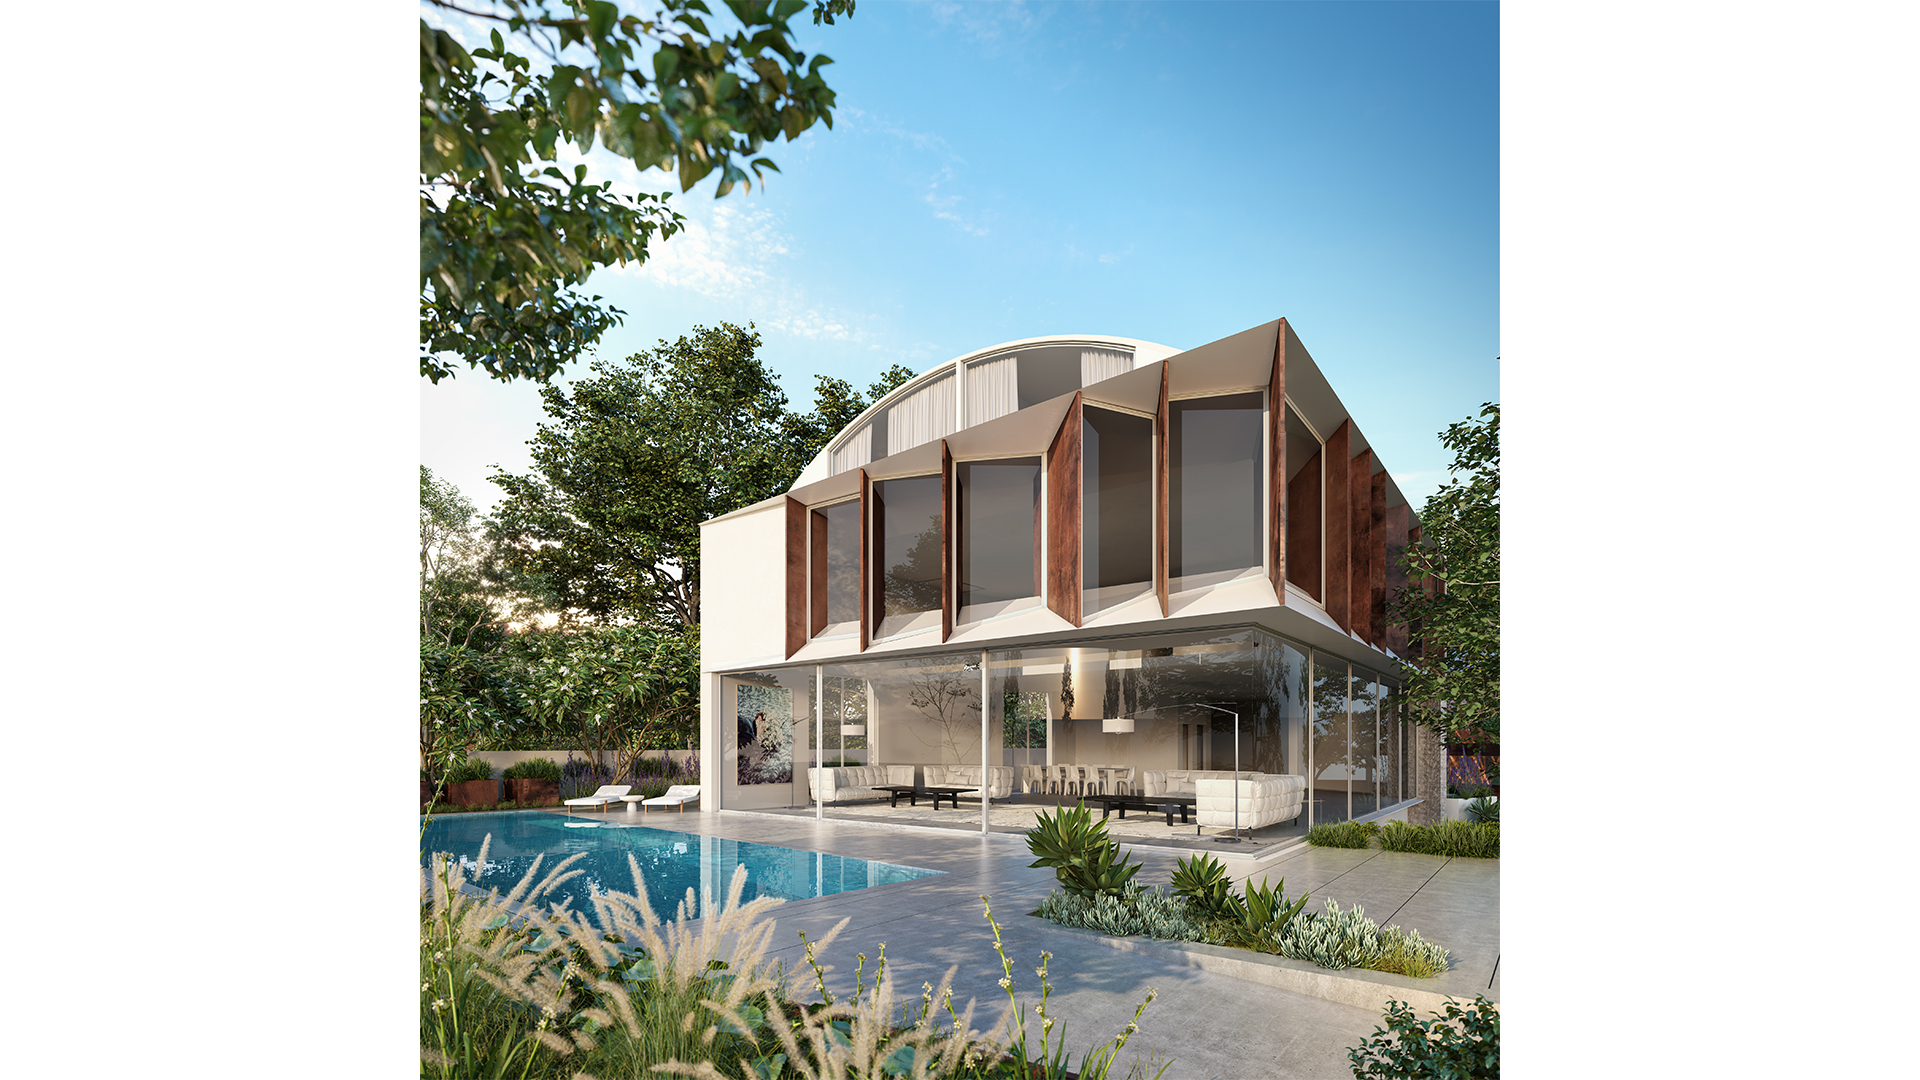 Maayan-Golan_Architectural-Visualization_H-house-exterior-visualization_back-elevation-pool_architecture-yulie-wollman_03